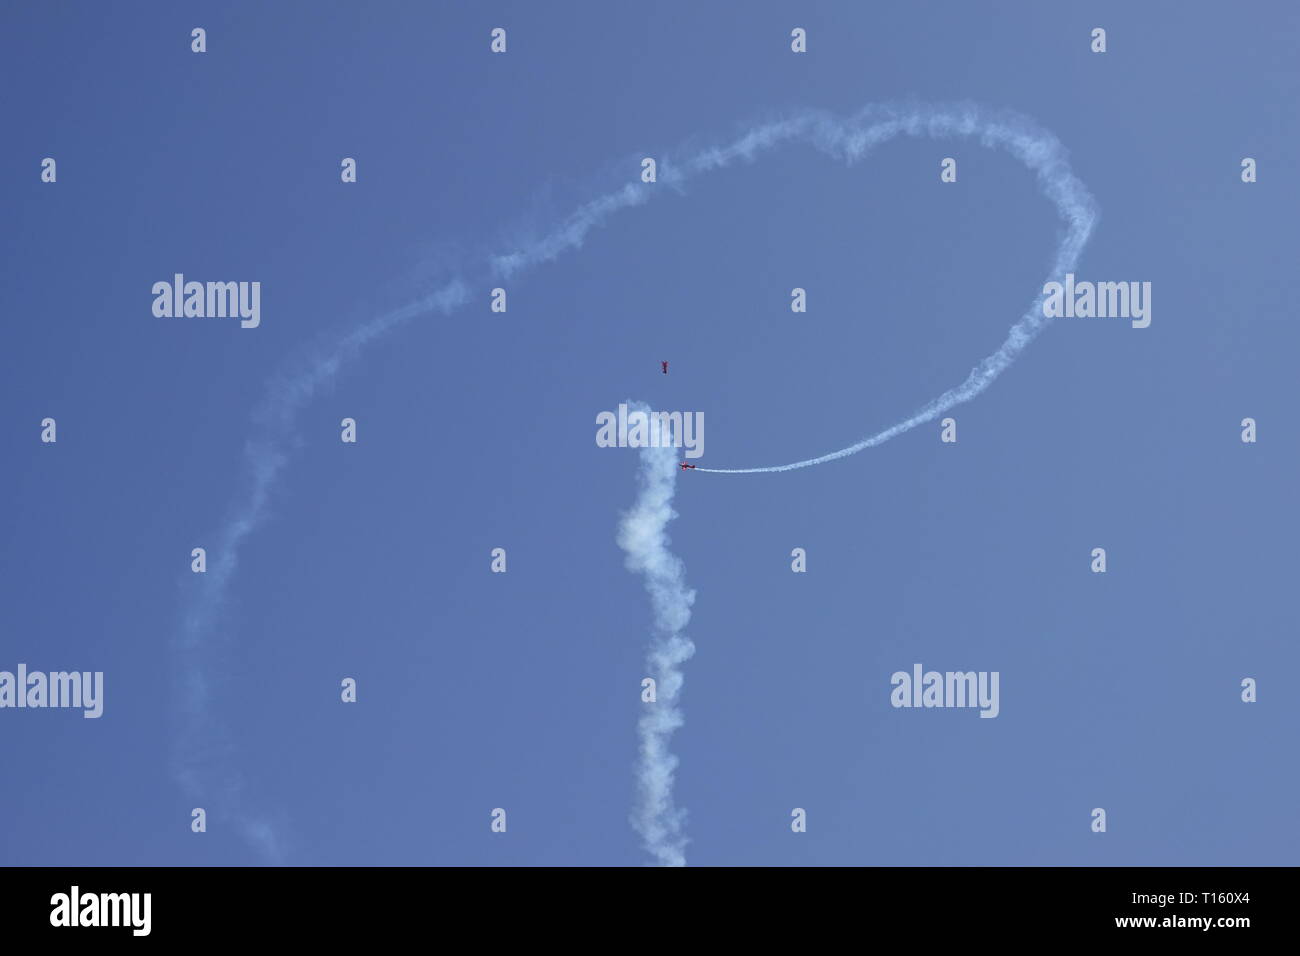 California, USA. 23rd Mar, 2019. 23rd March, 2019   Salinas, California, USA      Scenes from the annual  Salinas Air-Show, featuring the US Navy 'Blue Angels' arobatic team. here the ORACLE team ( Sean and Jessy Panzer) perform with their Pitts Special and Leader planes. Credit: Motofoto/Alamy Live News Stock Photo